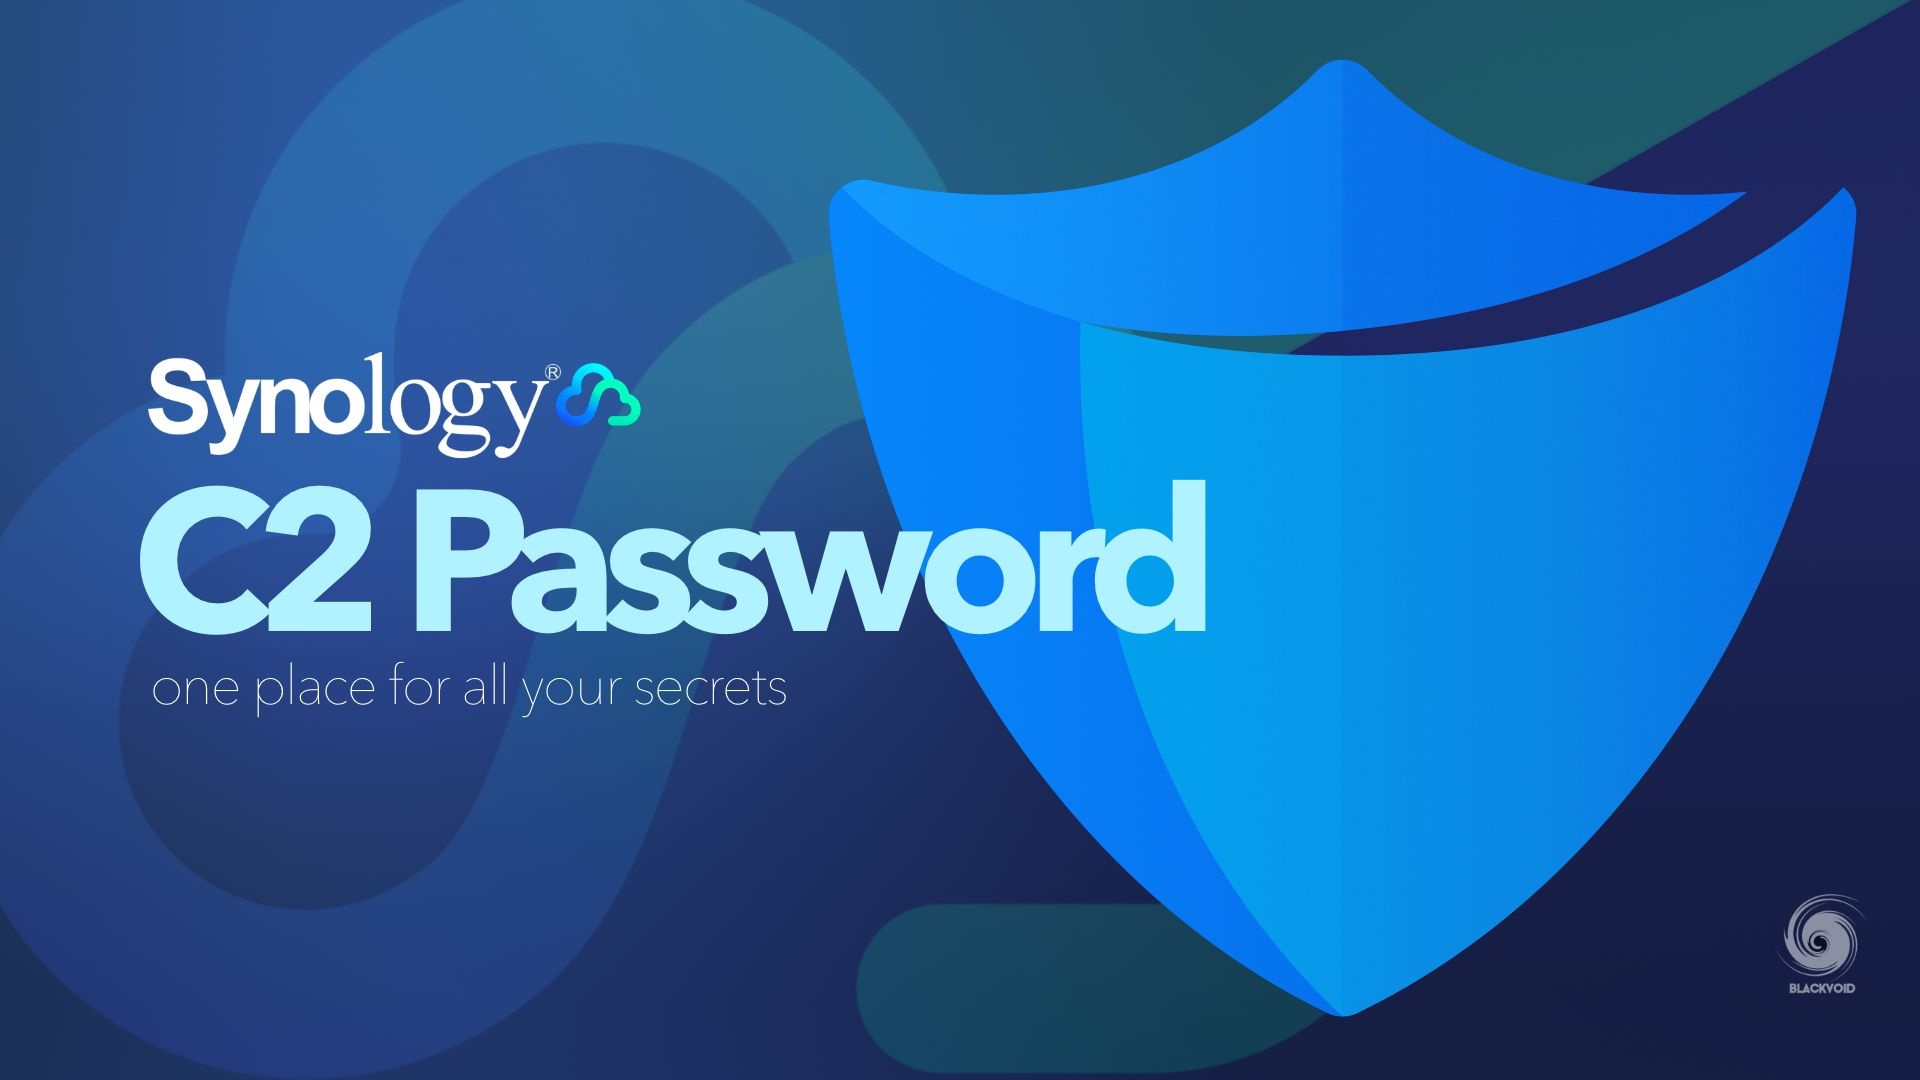 Synology C2 Password - one place for all your secrets